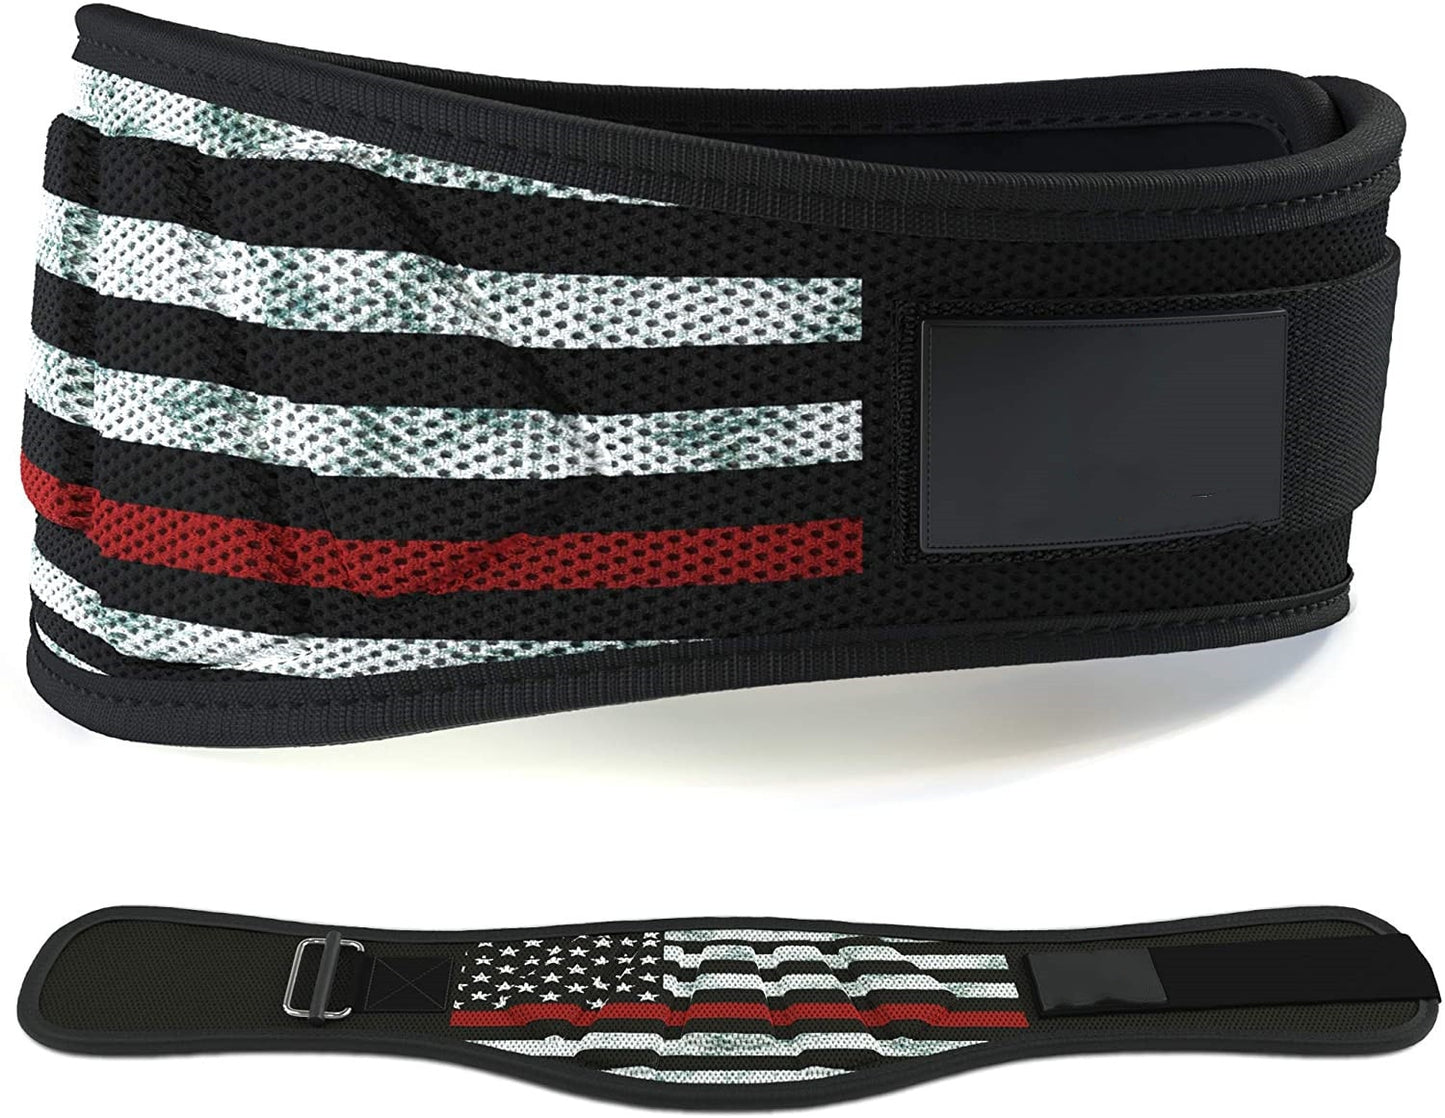 Weightlifting belts